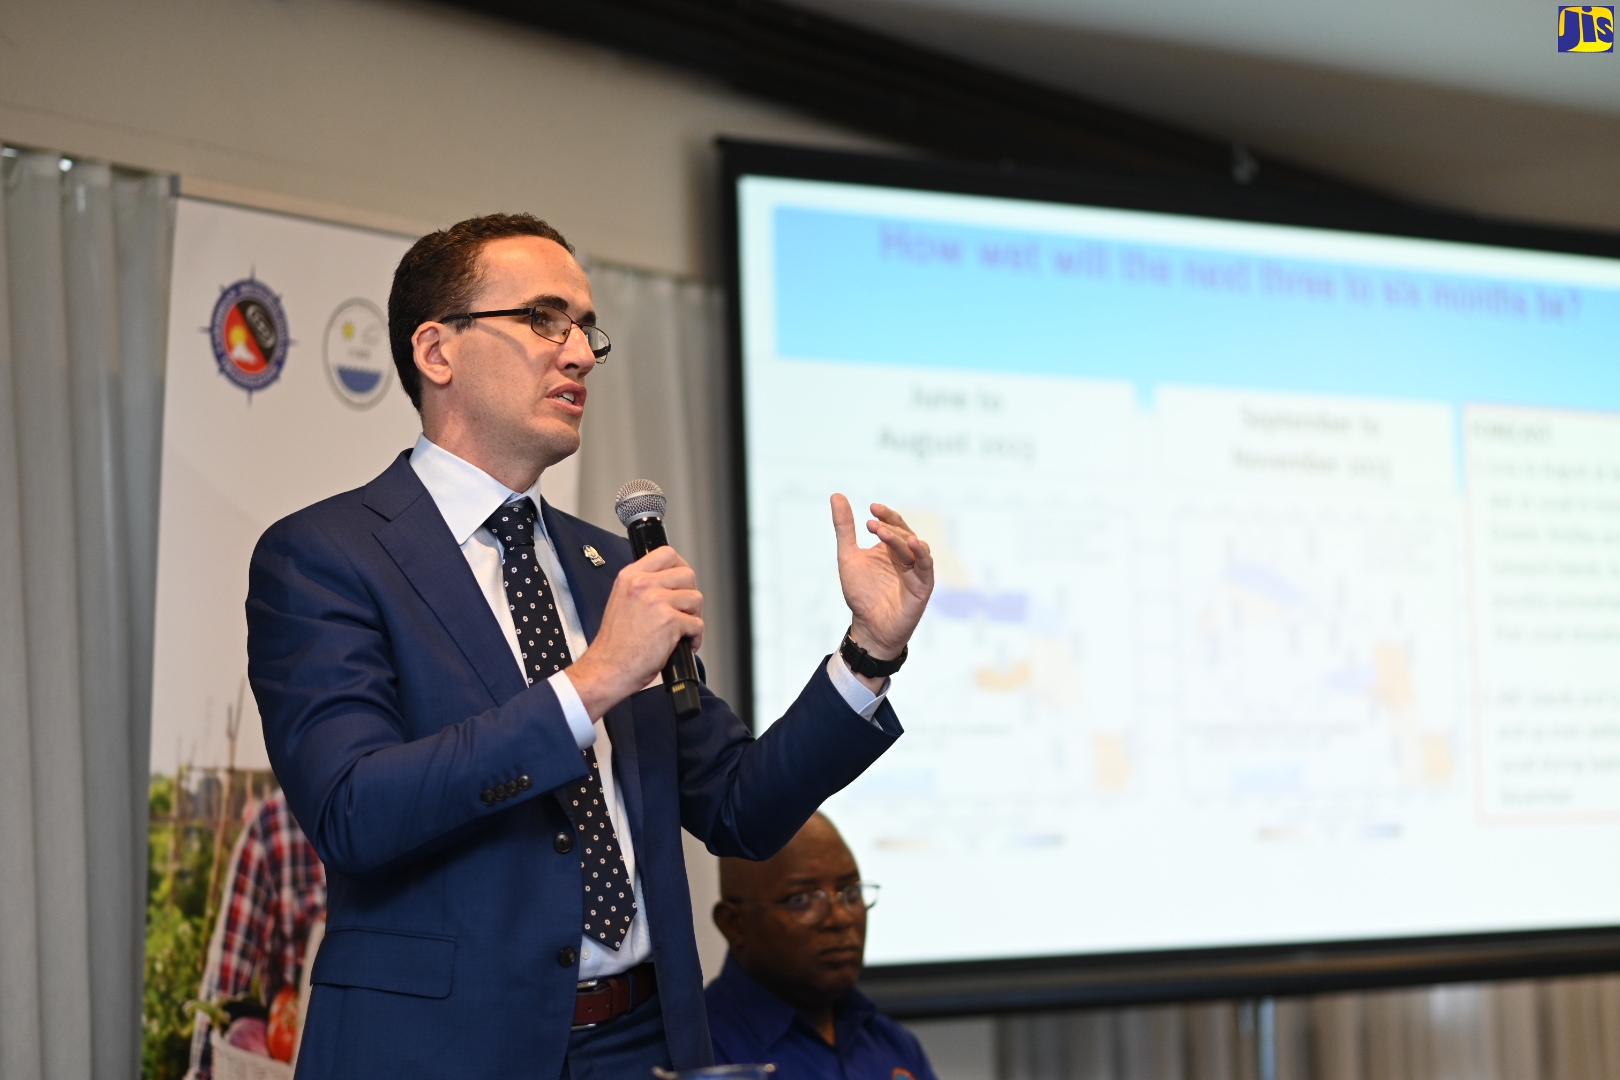 Climatologist at the Caribbean Institute for Meteorology and Hydrology (CIMH), Cédric Van Meerbeeck, gives an outlook on the 2023 Atlantic Hurricane season during the opening ceremony of the Caribbean Climate Outlook Forum, held recently at the Jamaica Pegasus Hotel in Kingston.